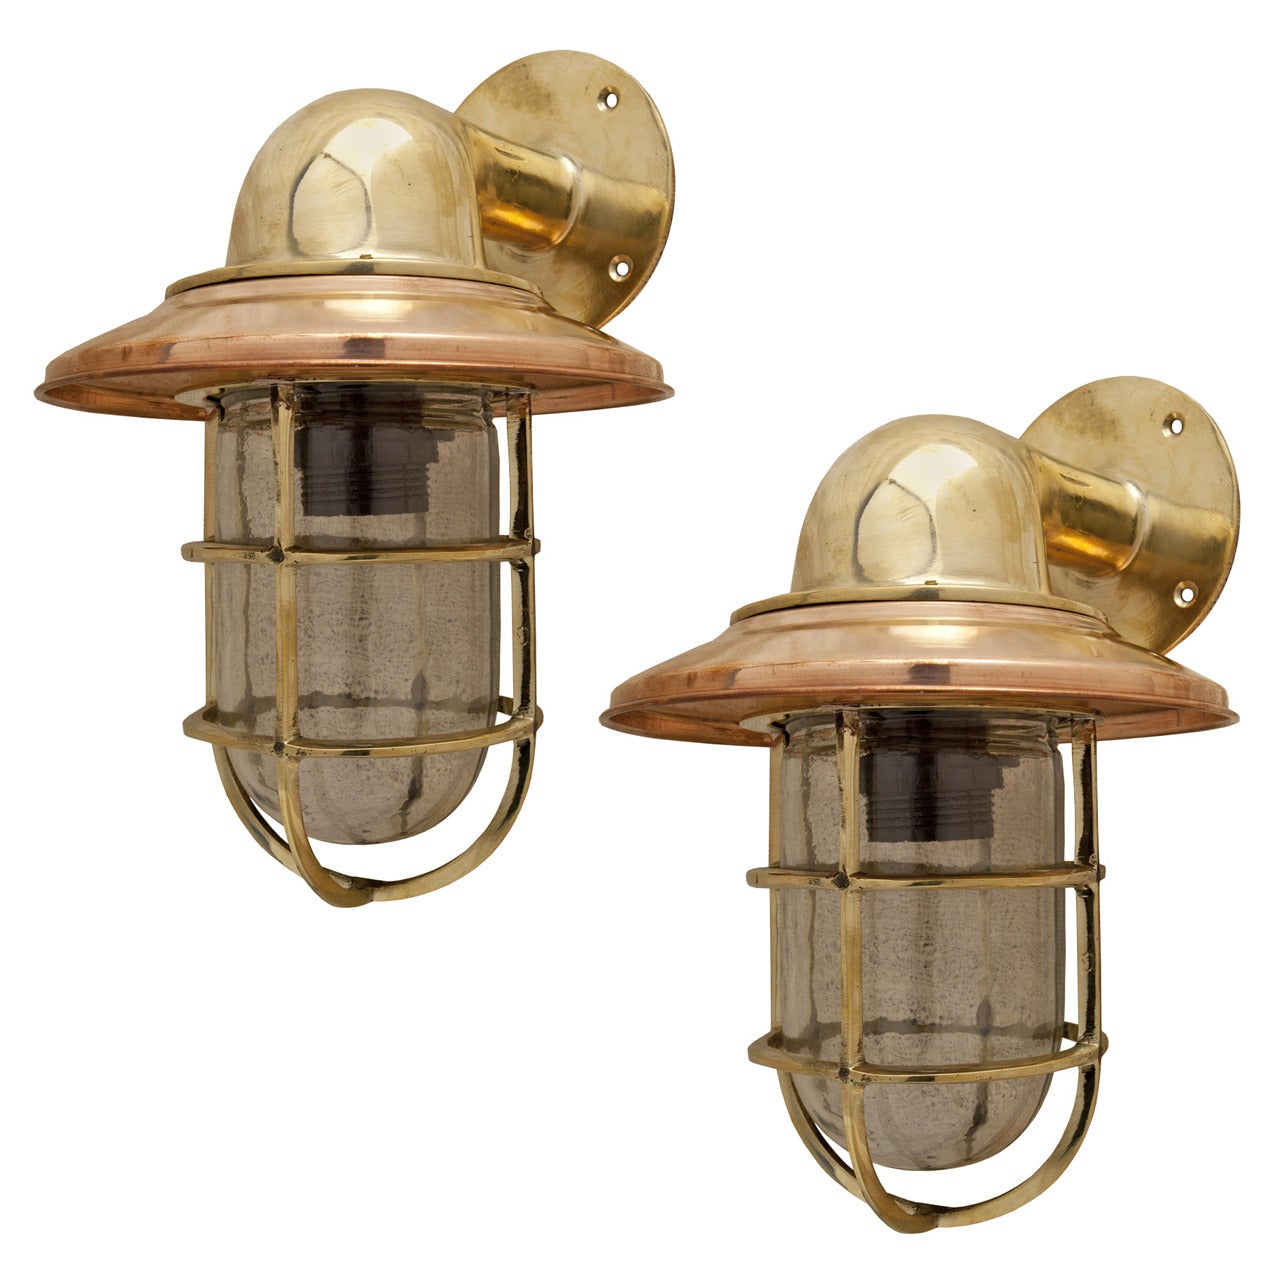 Pair of Ship's Brass and Copper Passageway Lights, Mid-Century